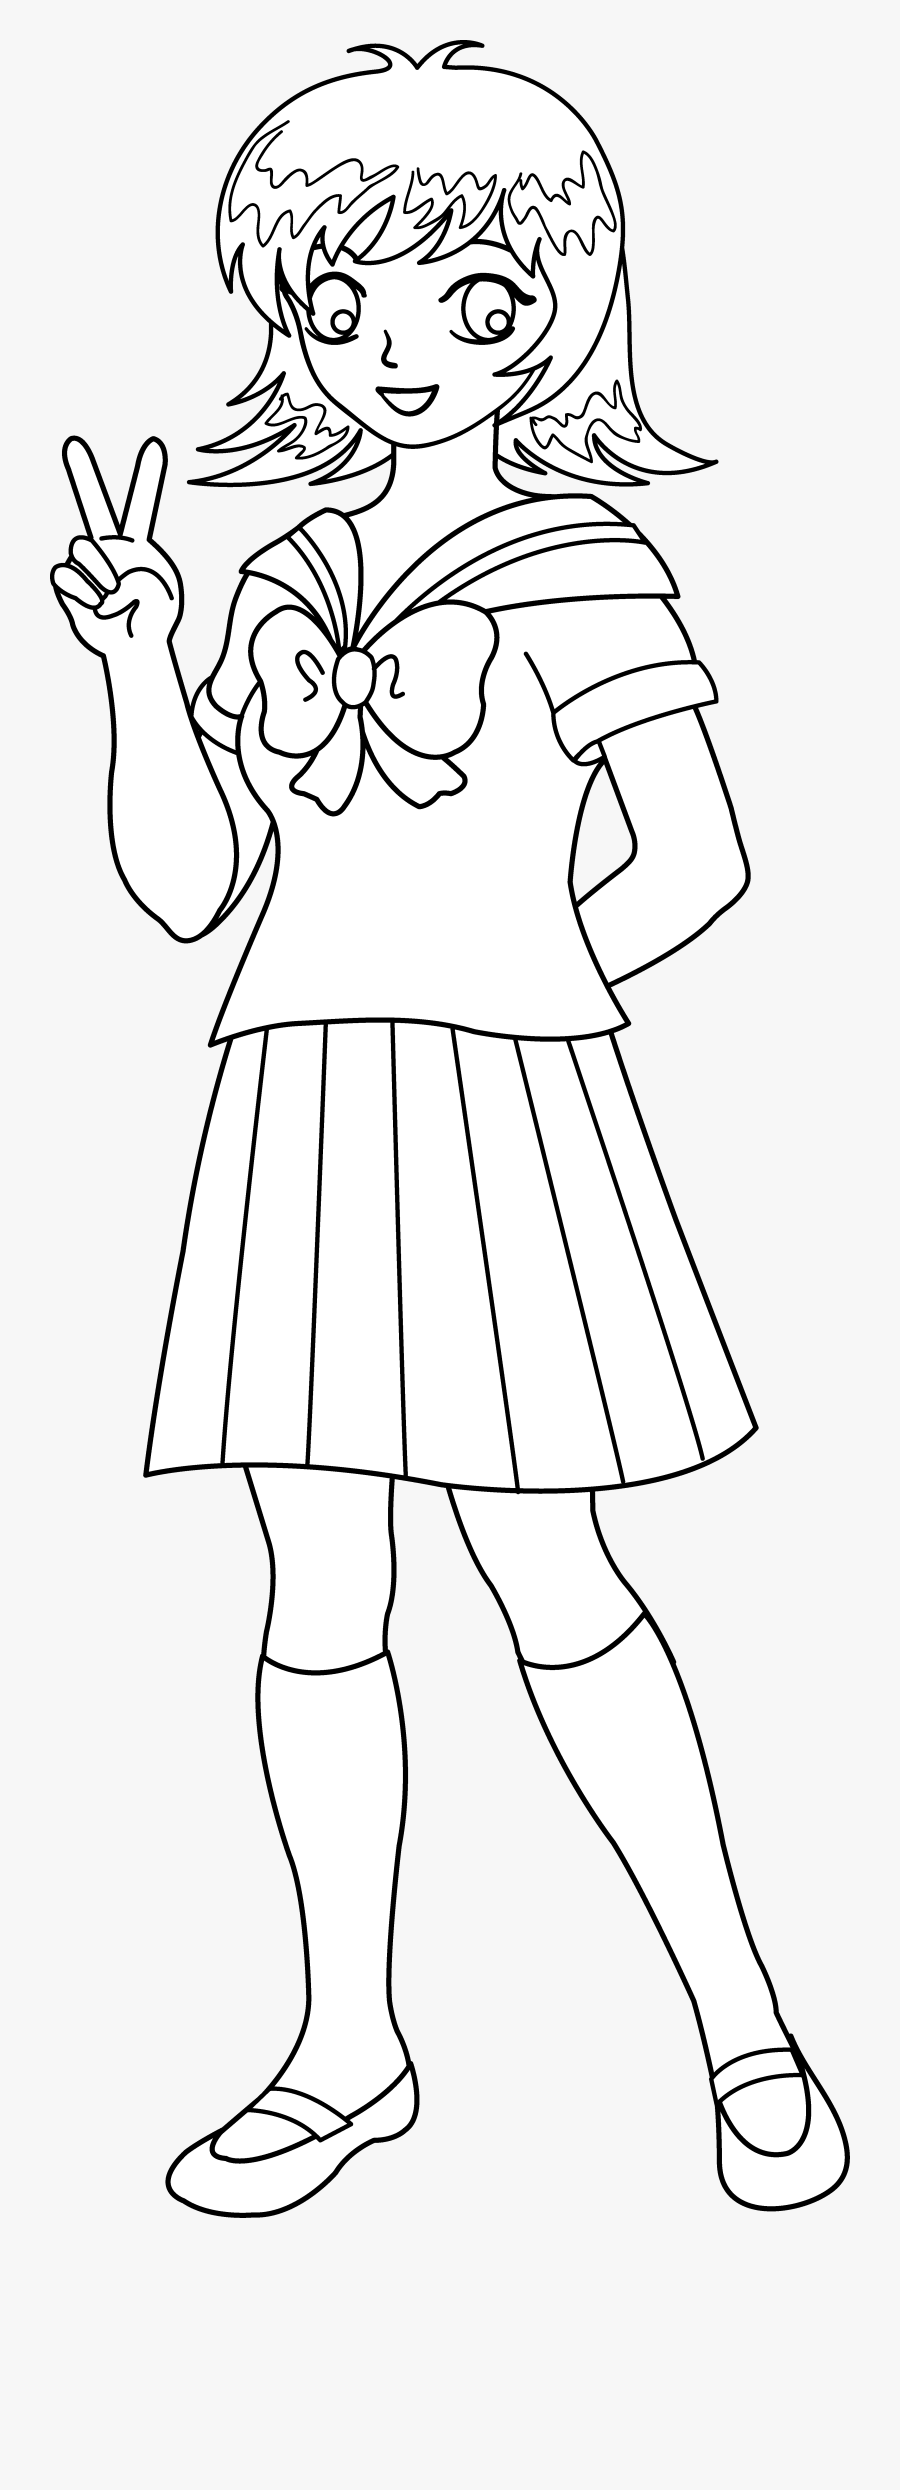 Anime Clipart Black And White - Clipart Black And White Anime School Uniform, Transparent Clipart